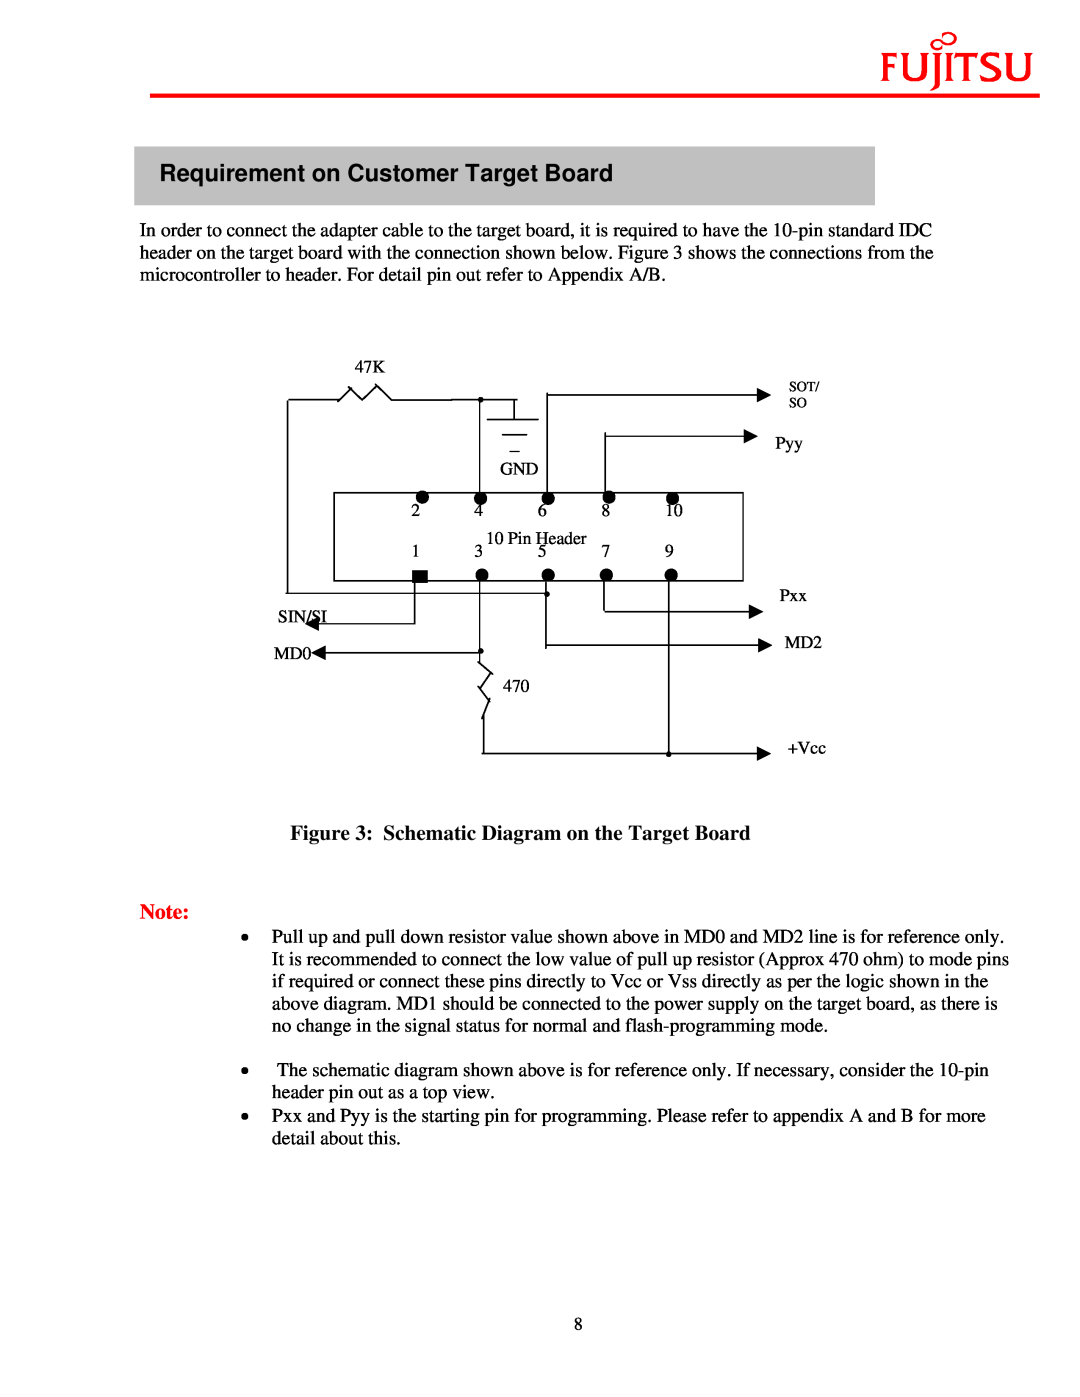 Fujitsu FMC-16LX/FR manual Requirement on Customer Target Board, Schematic Diagram on the Target Board 